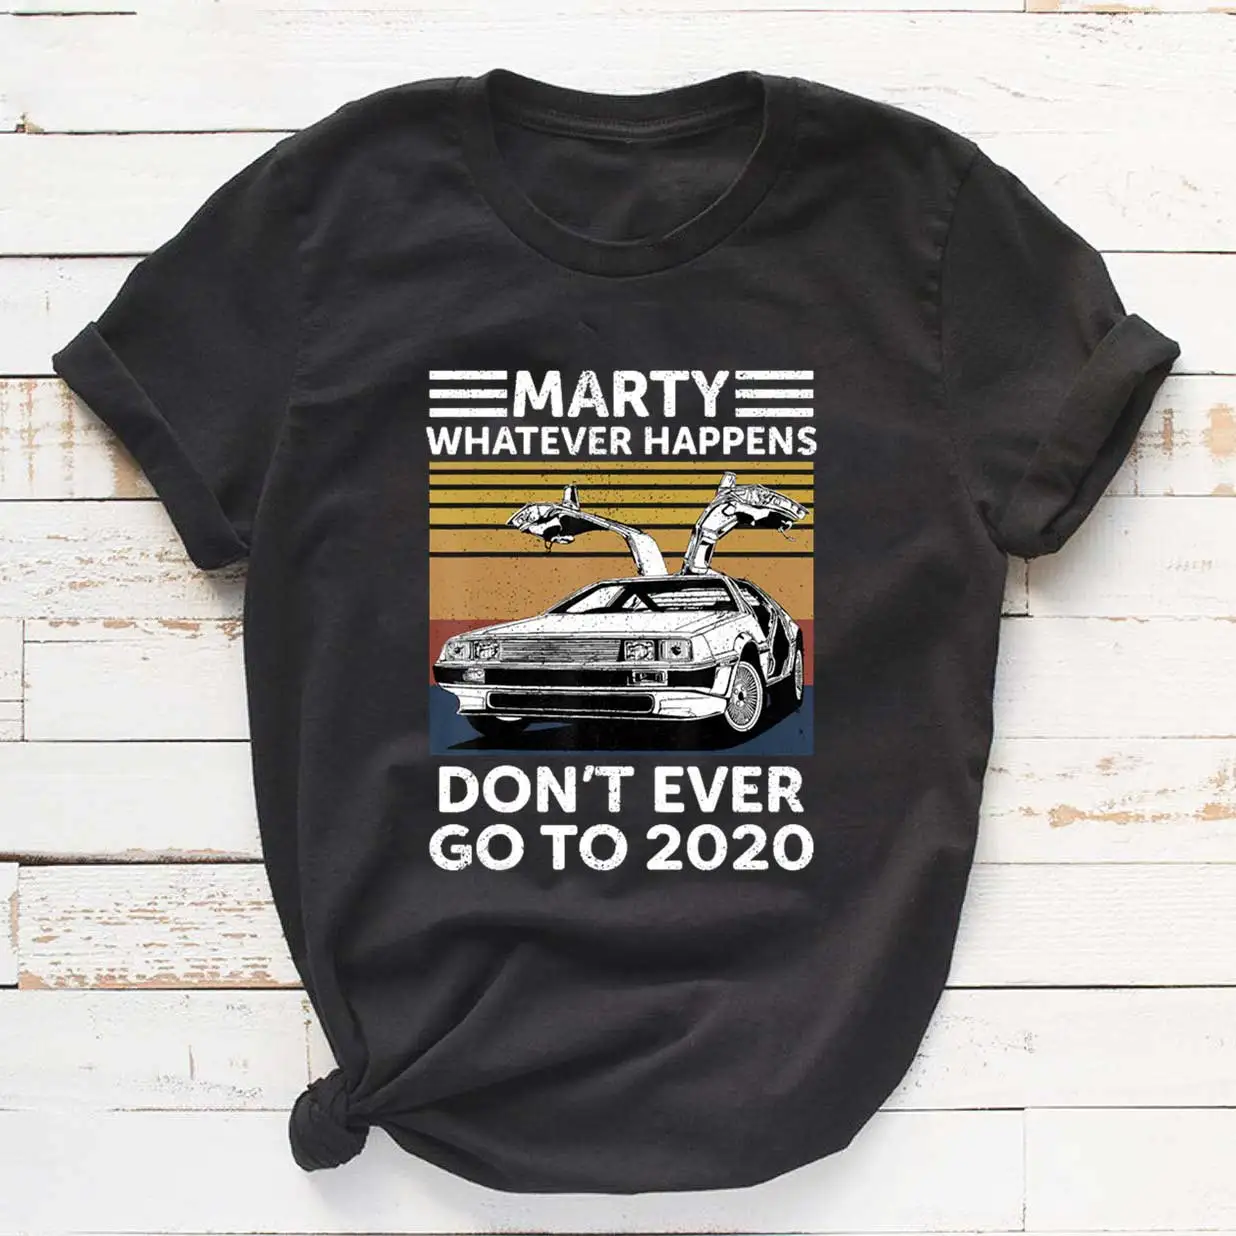 

Marty Whatever Happens Dont Ever Go To 2020 Women Funny Graphic T Shirt Girl Base O-neck Black Tees Lady Tshirt,Drop Ship